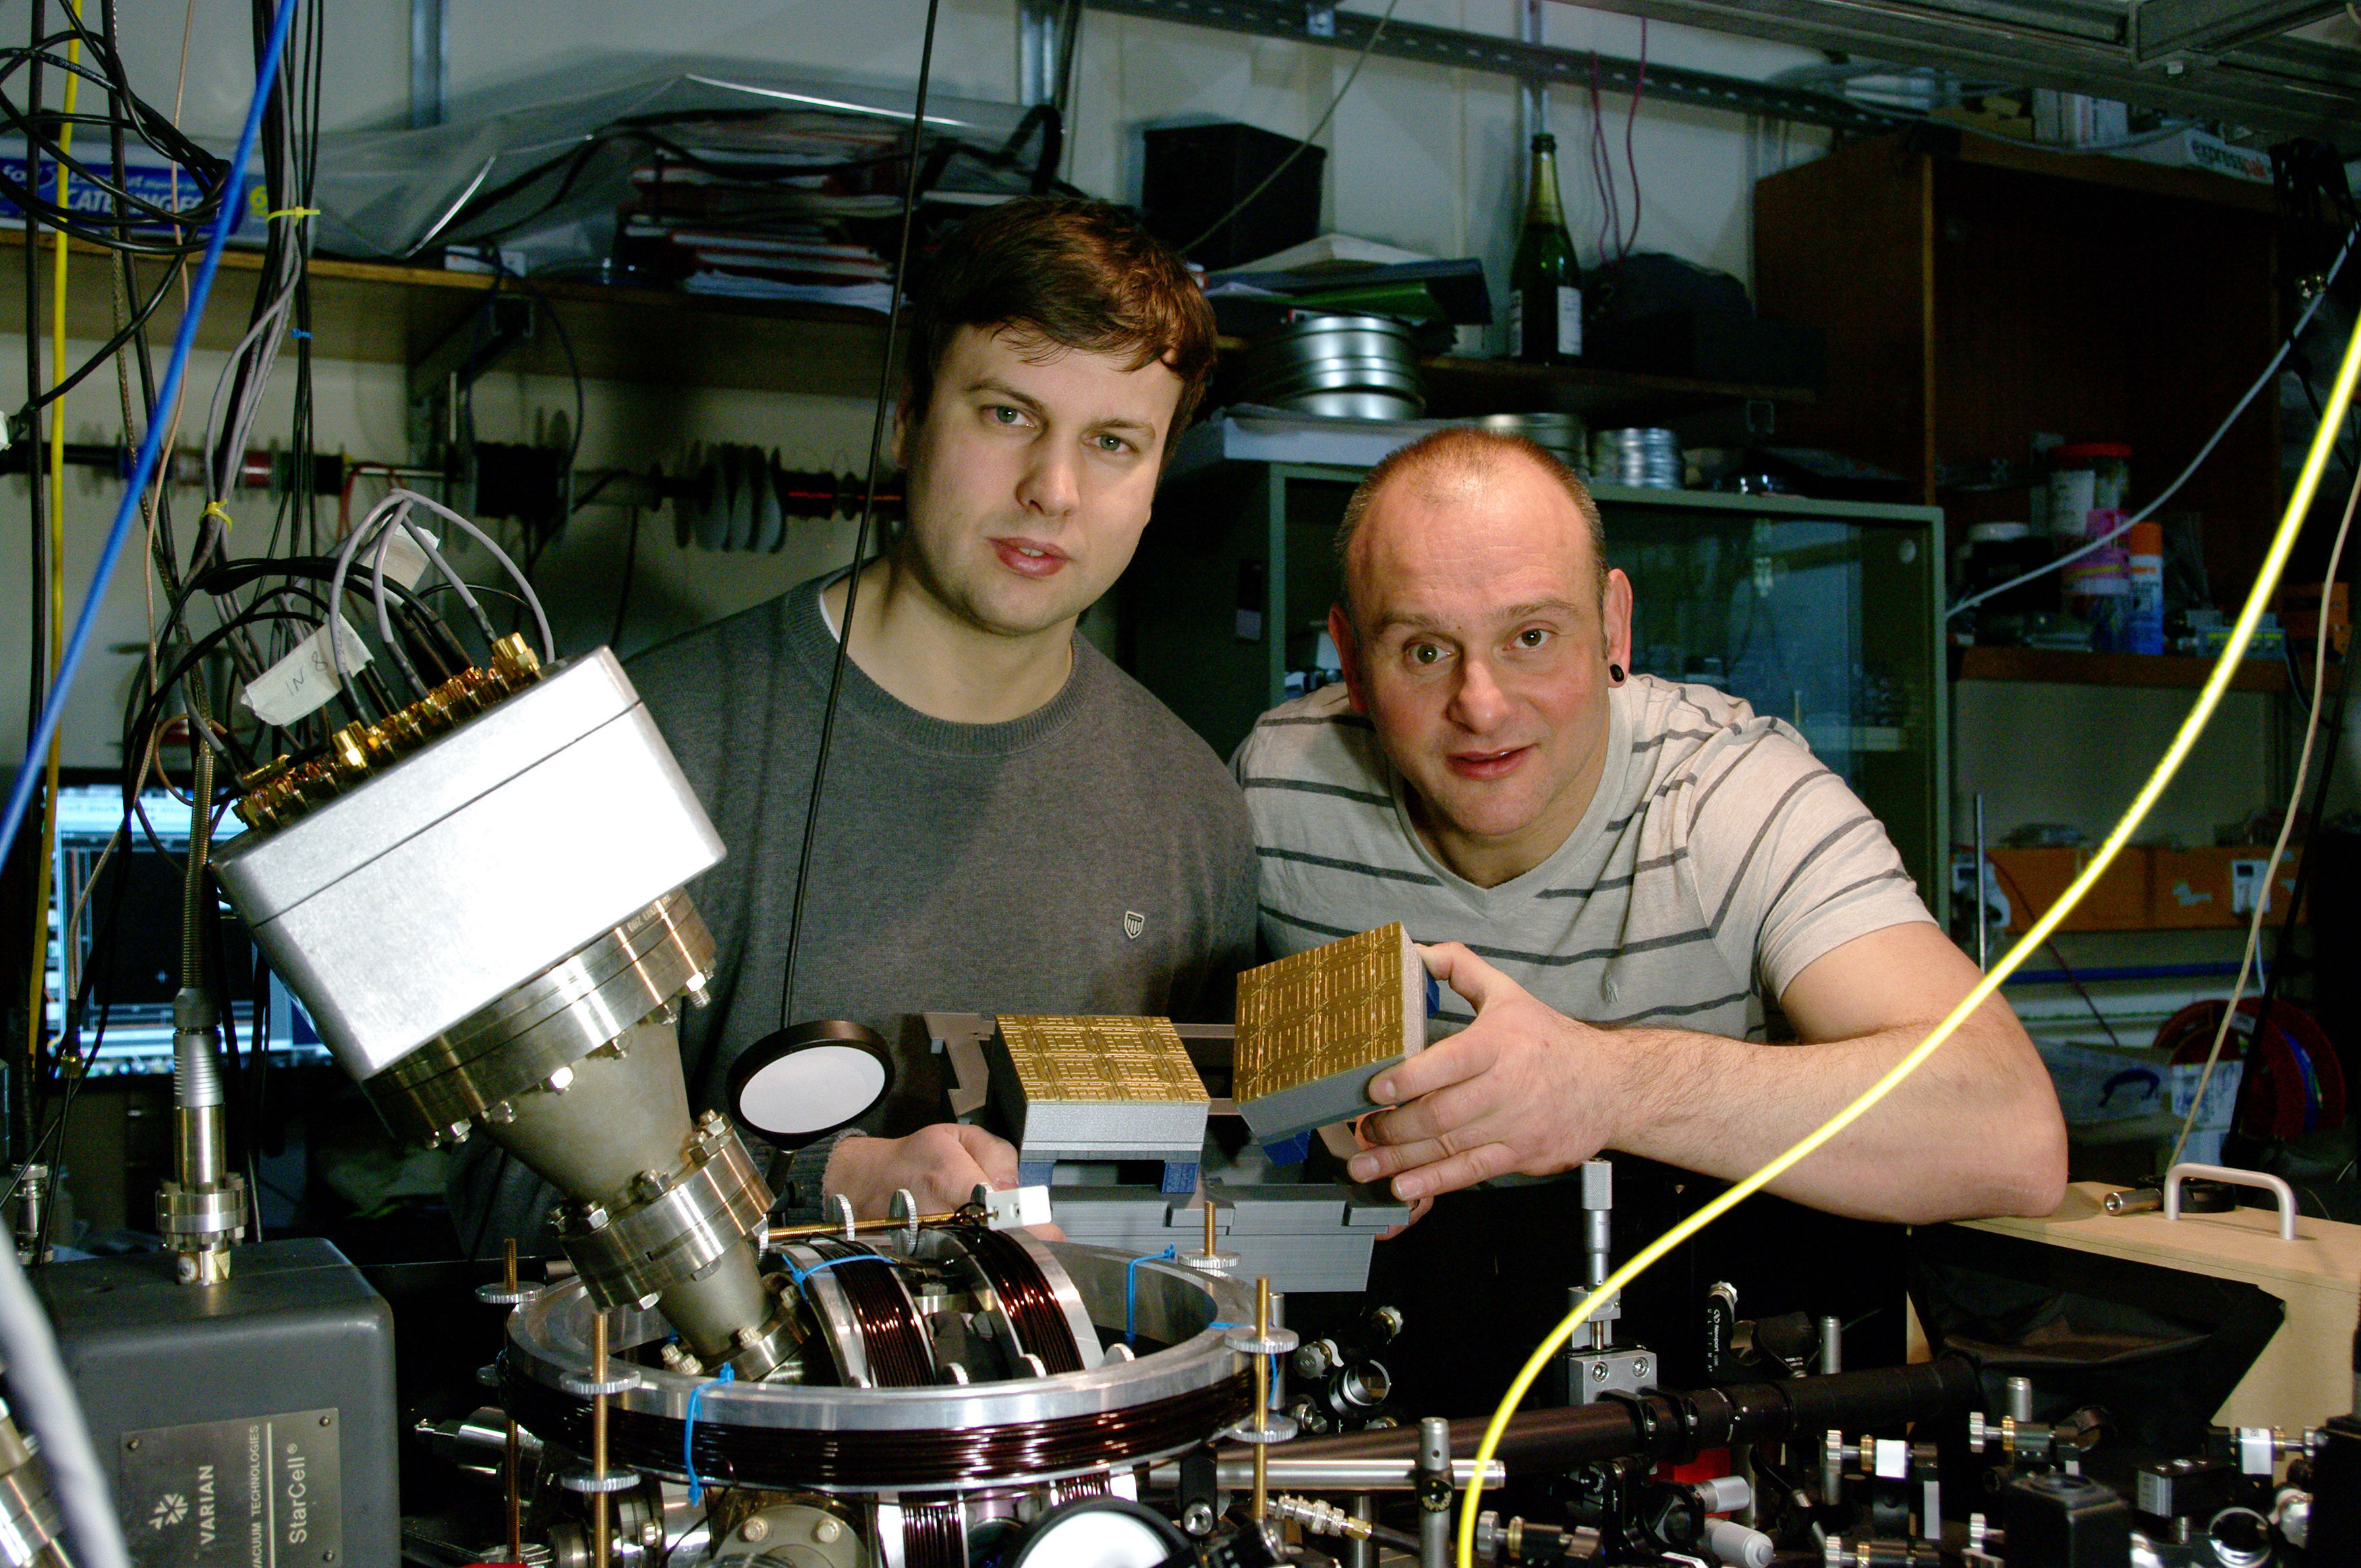 Professor Winfried Hensinger (right) and Dr Bjoern Lekitsch (left) with a quantum computer blueprint model behind a quantum computer prototype at the University of Sussex earlier in 2017